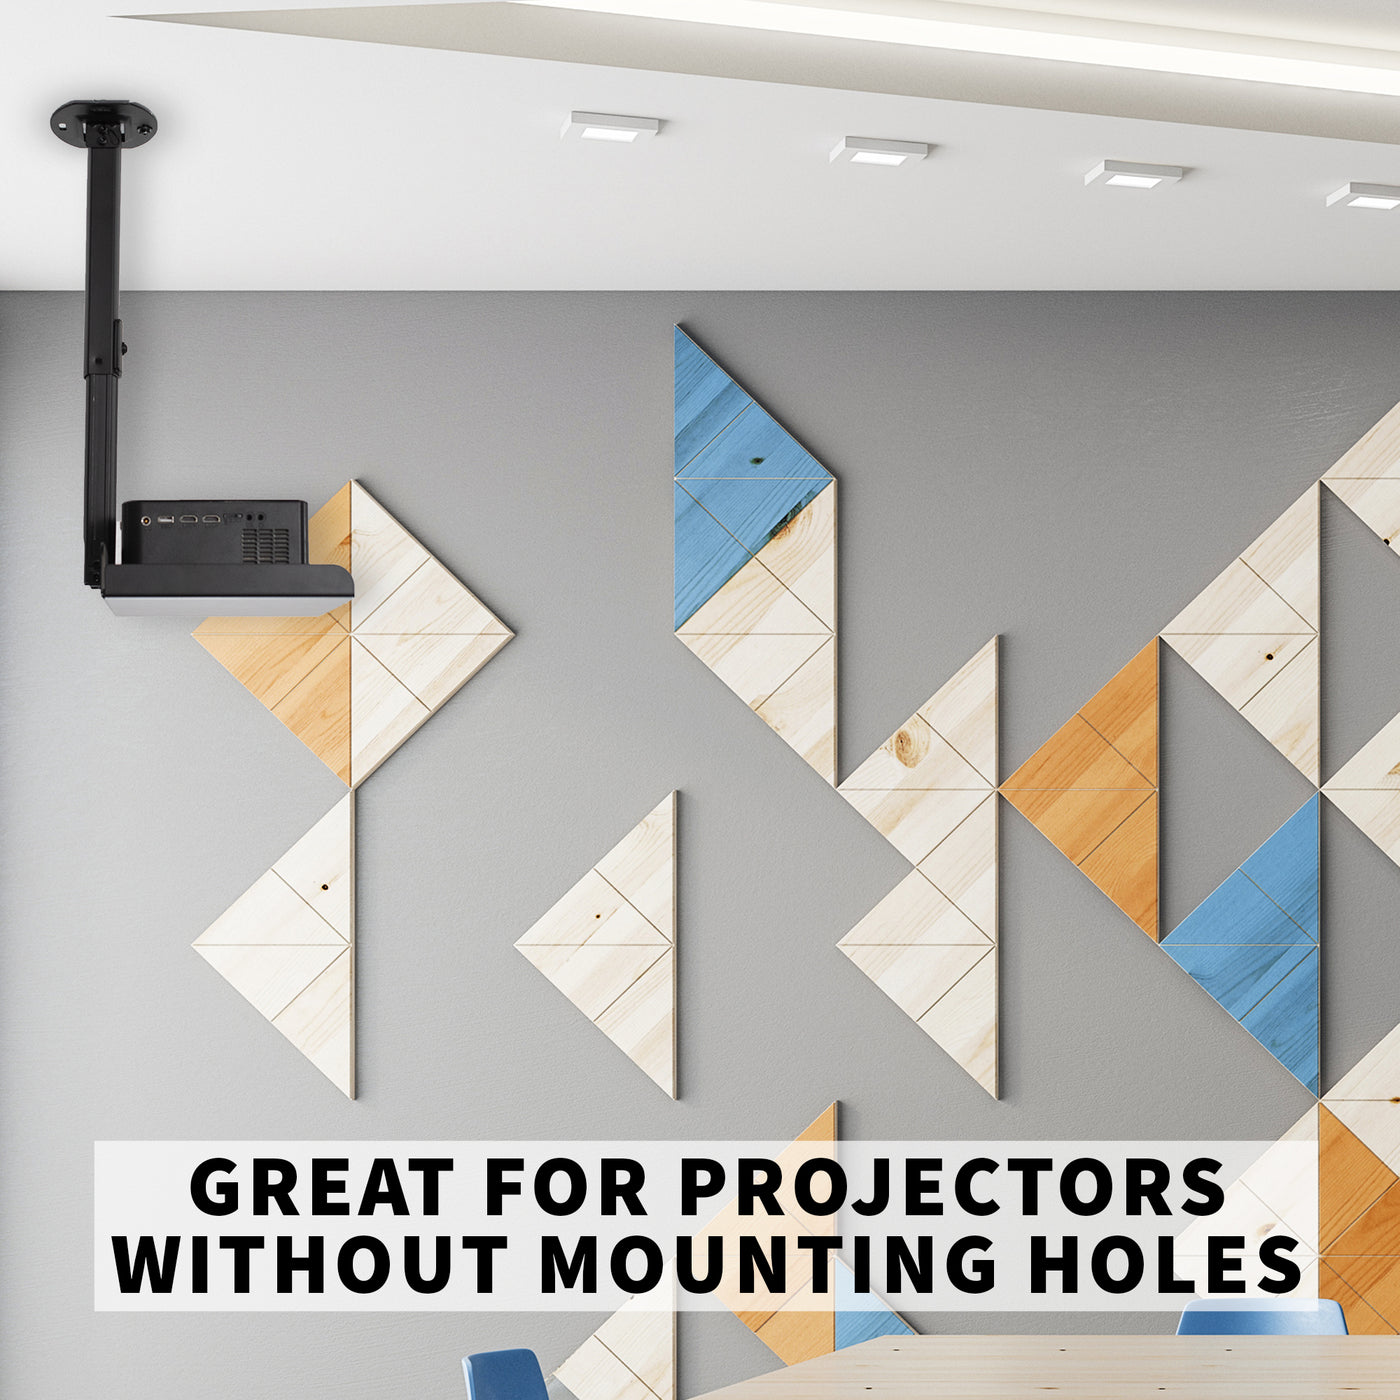 This projector shelf ceiling mount is ideal for projectors with no mounting holes.